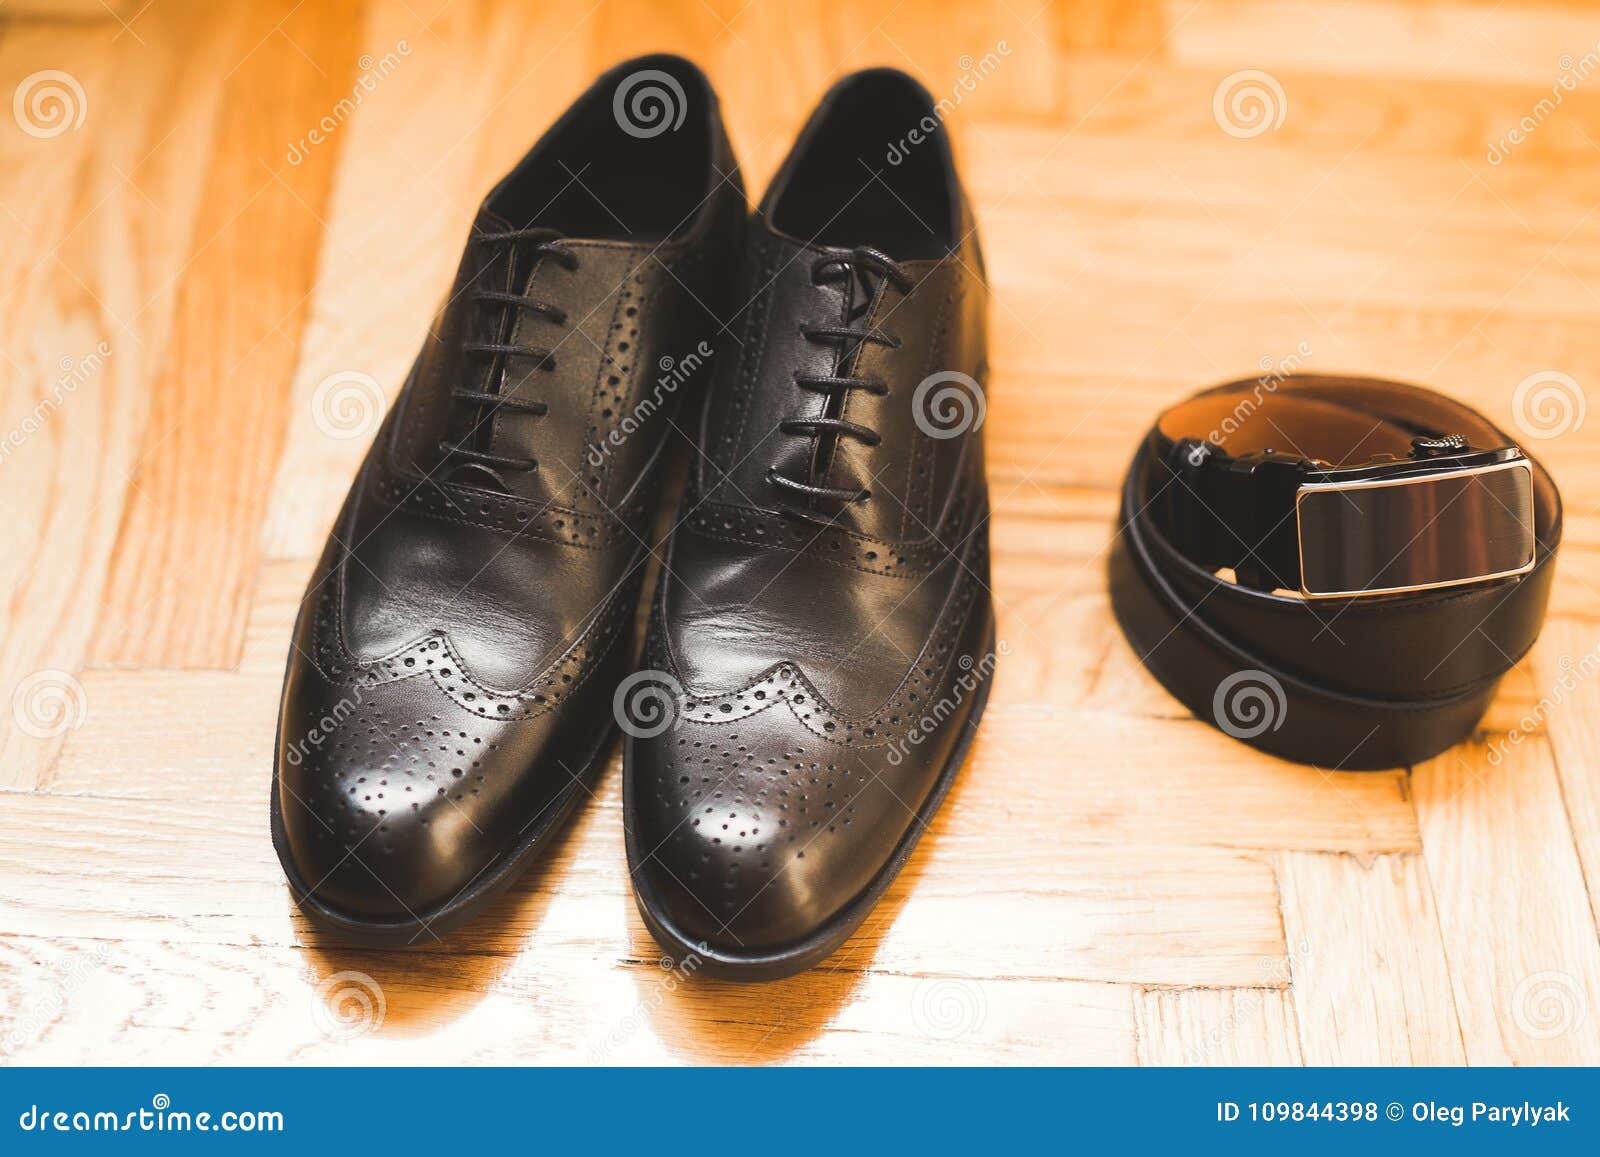 Men`s Accessories With Luxury Shoes. Top View Stock Photo - Image of formal, accessories: 109844398